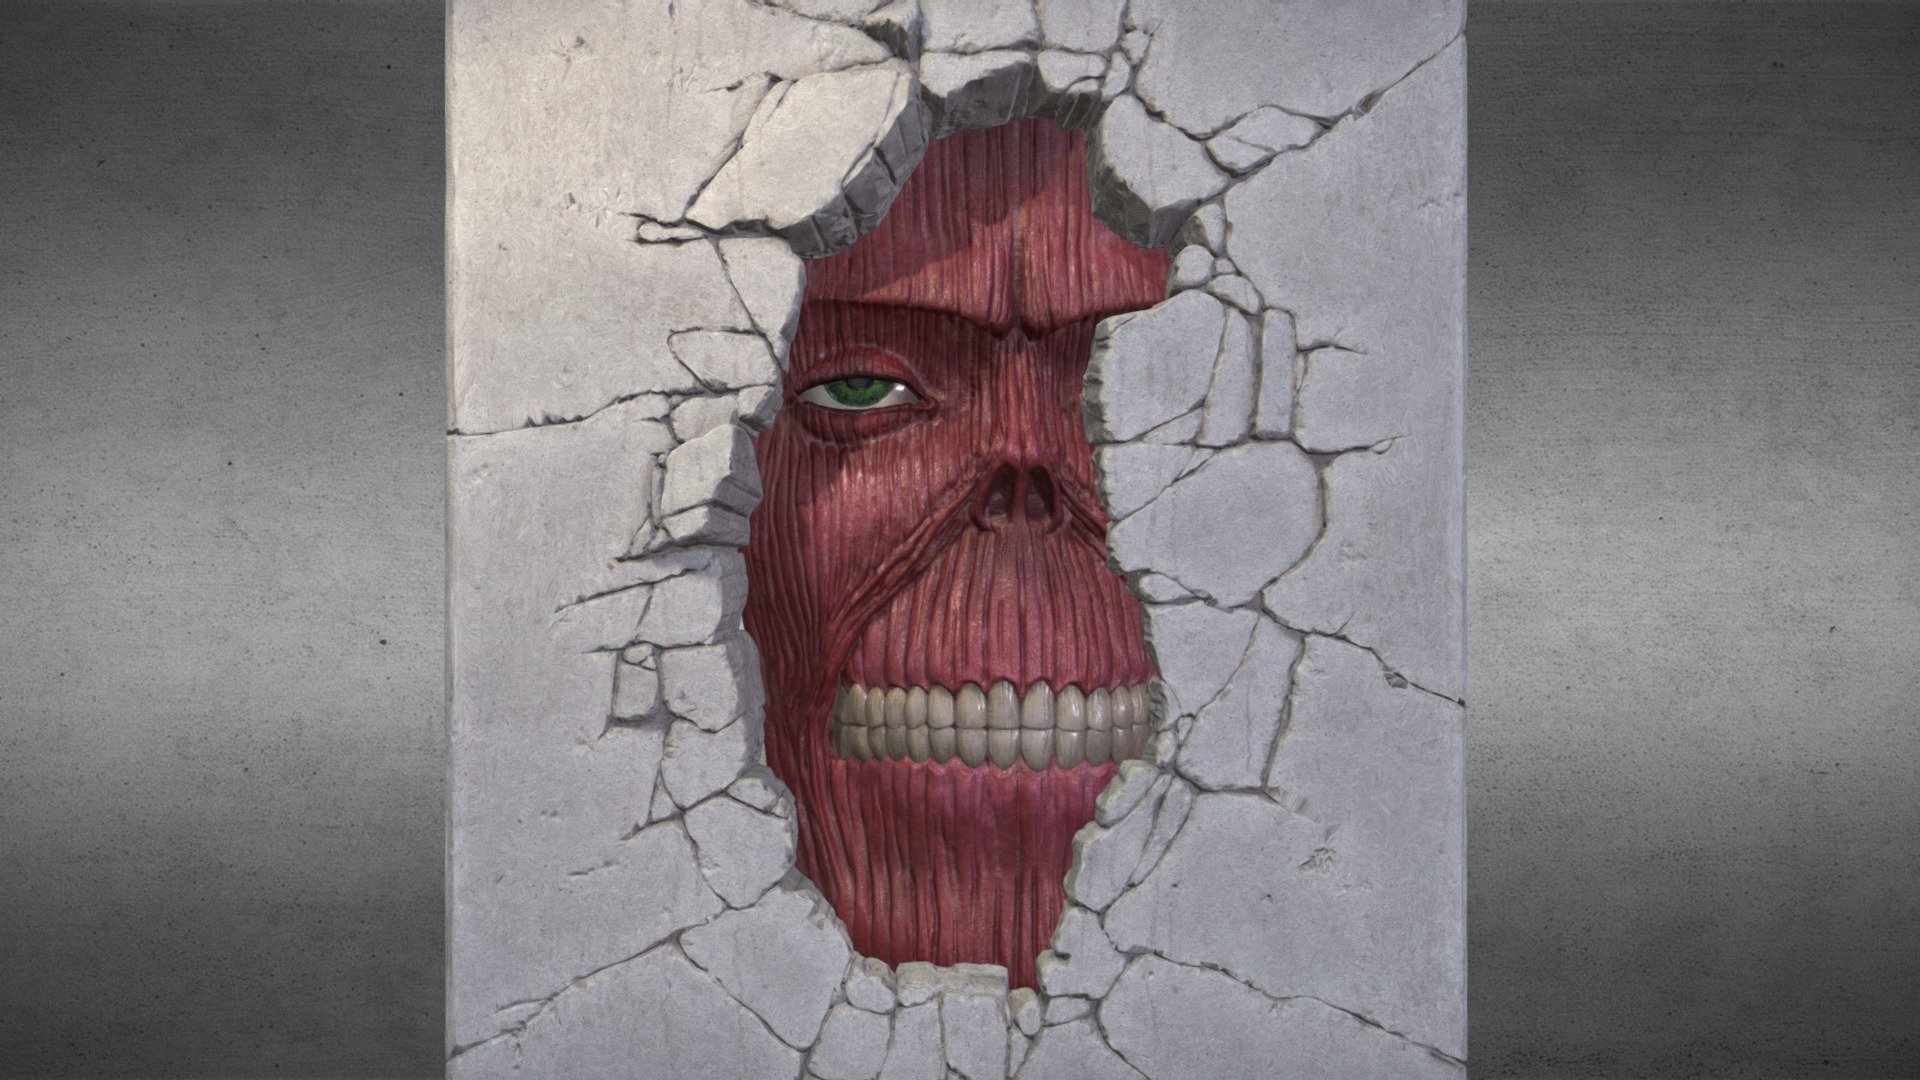 Titan in the wall from manga Attack On Titan.

Appearence in manga chapter 33 after The female titan damaged part of the Wall.

Download file is 3d print format not included low polygon model and PBR textures 3d model